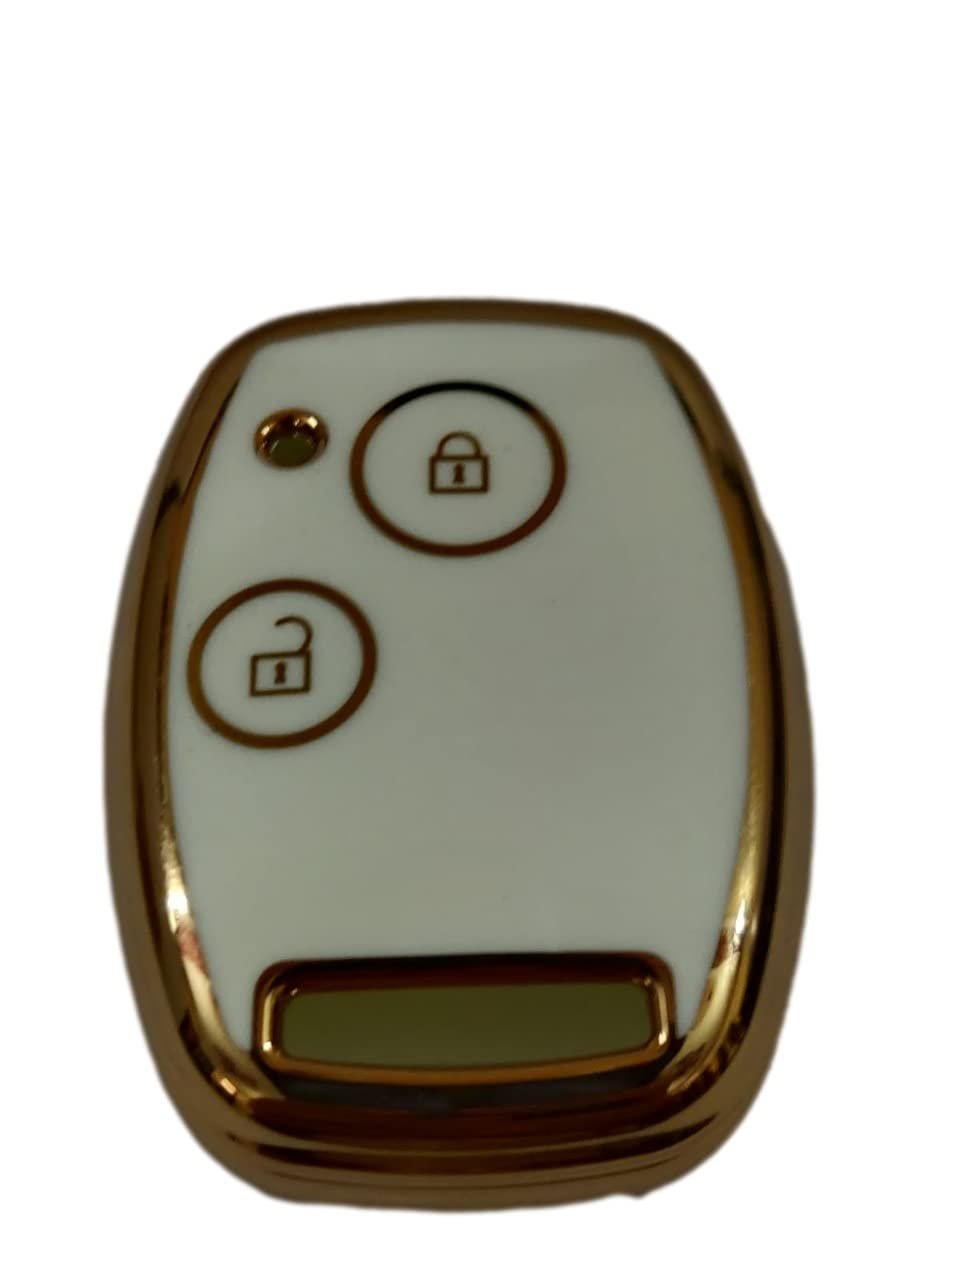 TPU Key Cover For Compatible with City, CIvic, Jazz, Brio, Amaze 2 button remote key (White)  Image 